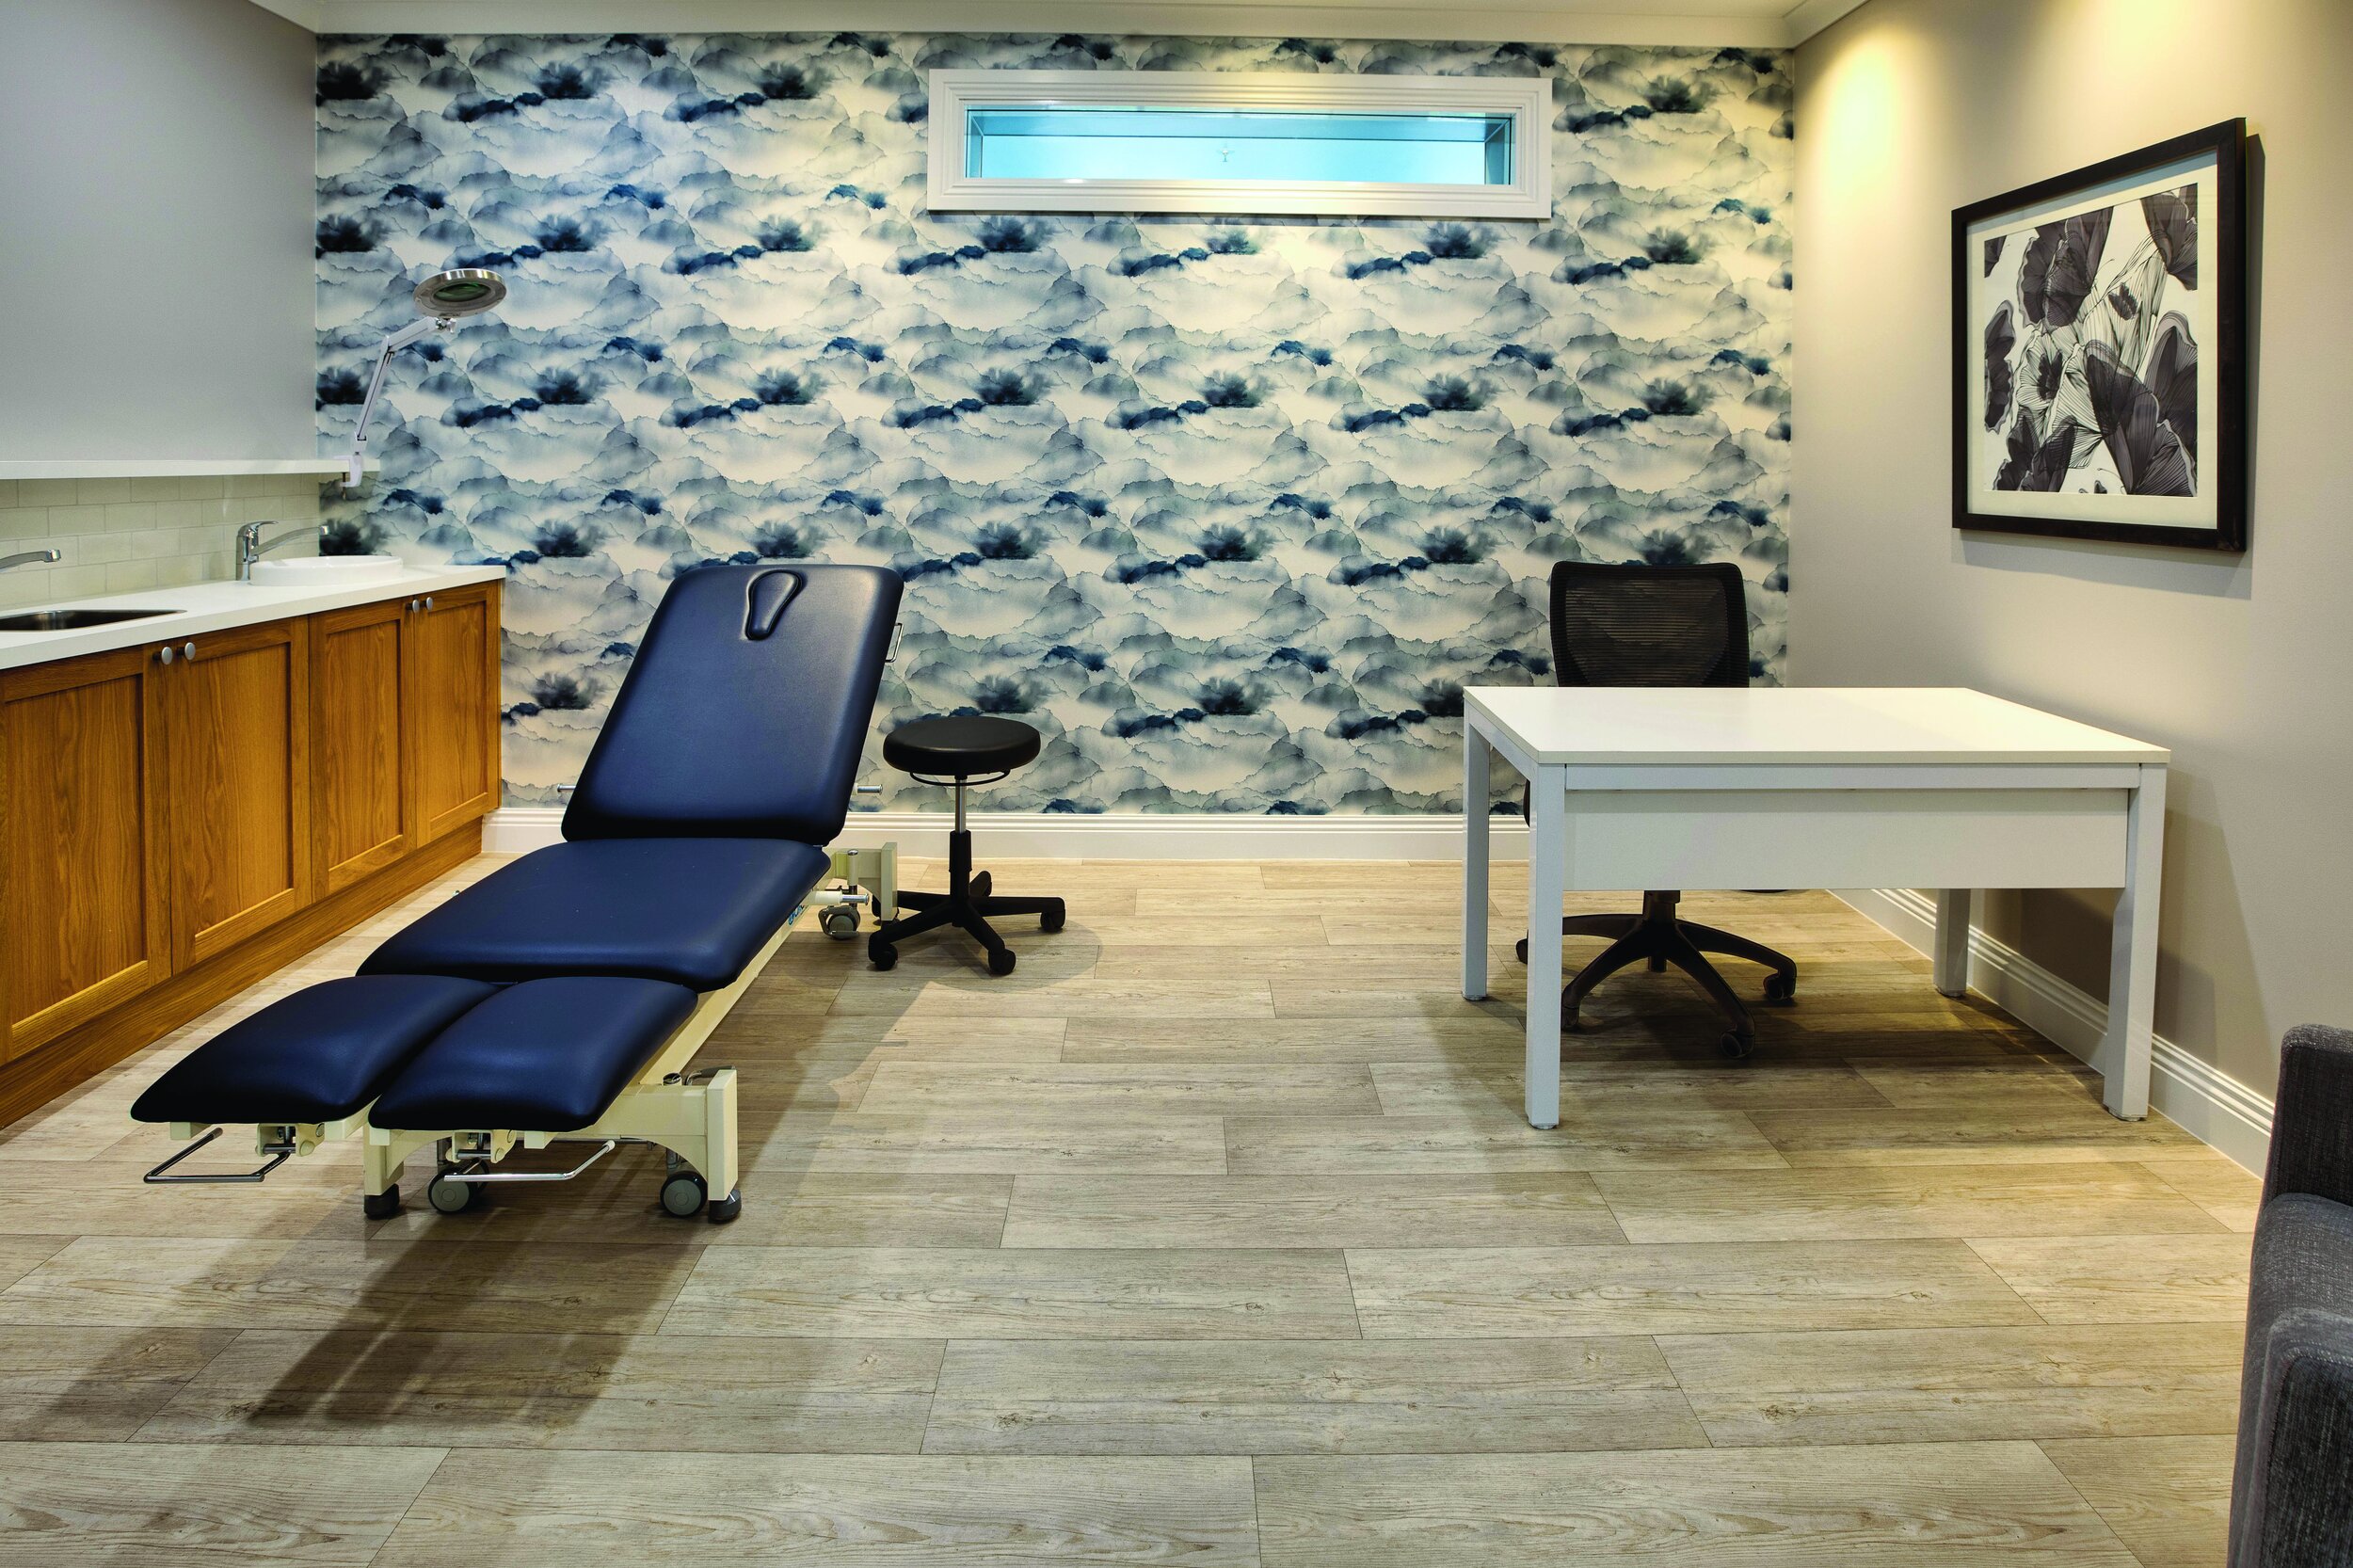 Standard Main Building Beauty Therapy Room - 1 - PRINT.jpg